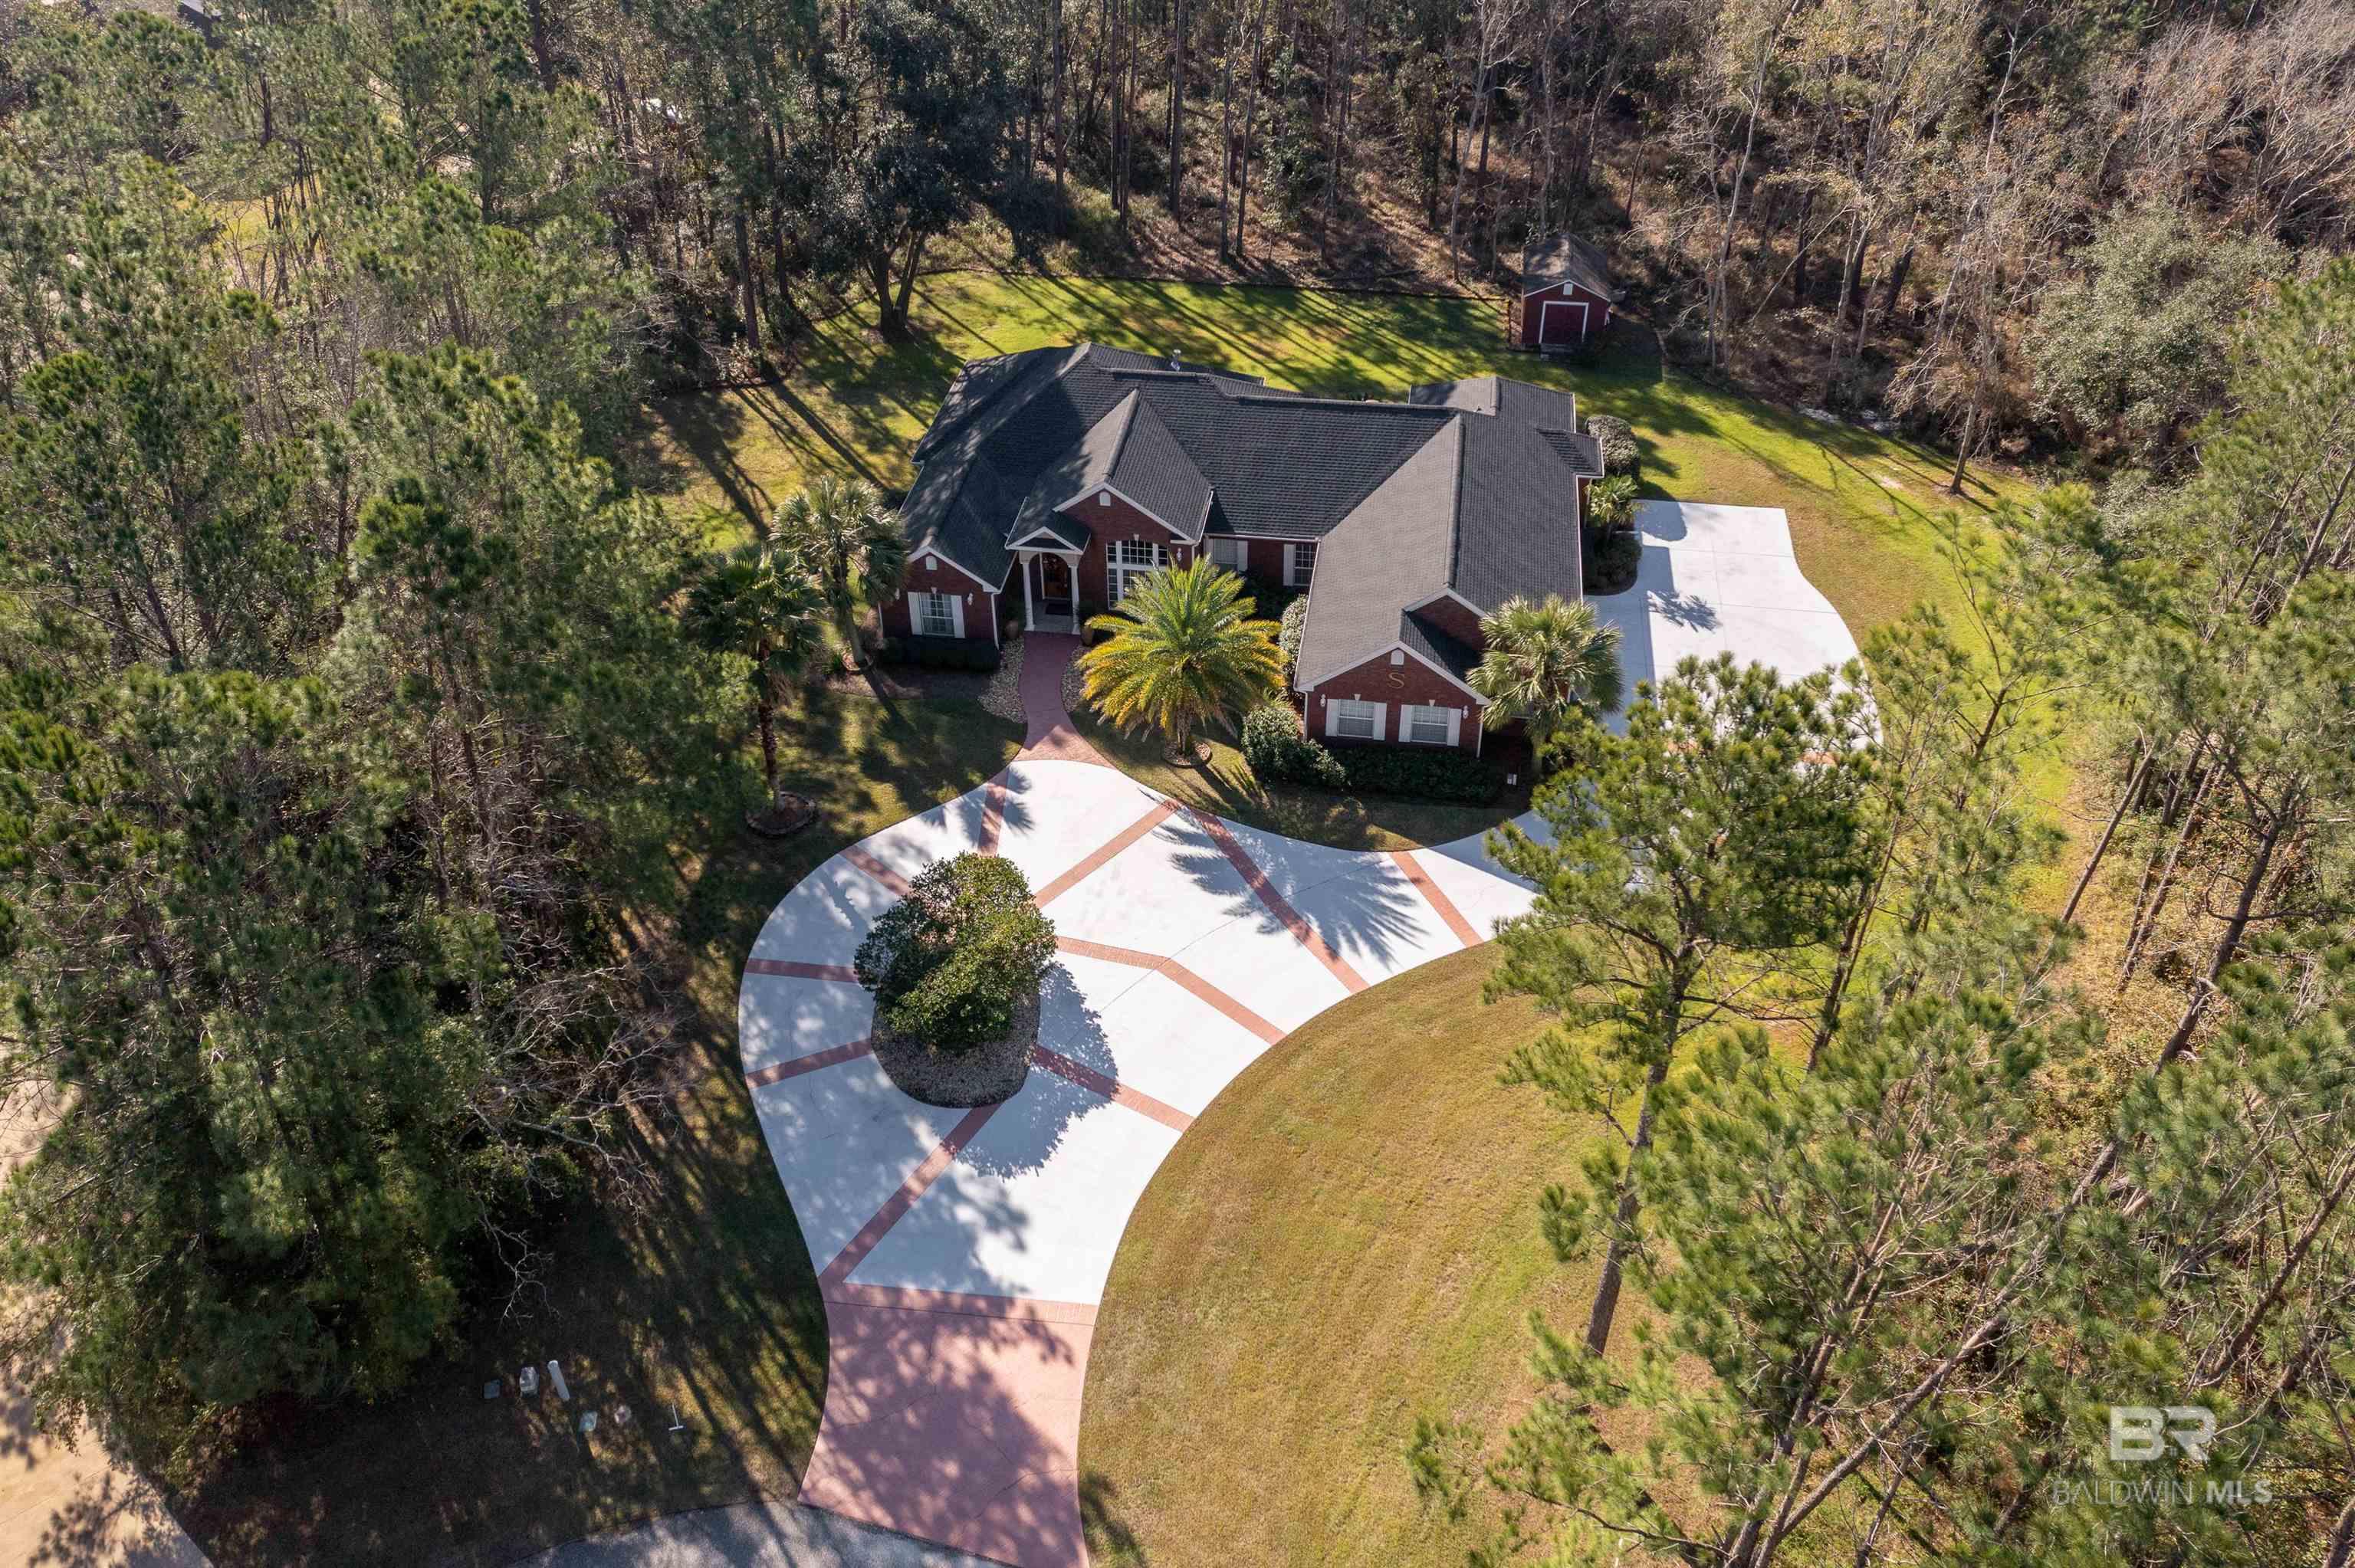 Looking for that peaceful place? Then come over to 18132 Treasure Oaks Ct. This home sits at the end of a cul de sac on approximately 1.5 acres. As you pull in you will notice the circular drive along with the drive leading down the side of the house to the triple car garage. The garages are heated and cooled with their own central unit. As you walk into the home you will see the large family room featuring hardwood floors and a gas fireplace. Over in the kitchen you have a ton of storage space along with lots of granite counters. All the stain steel appliances remain including the side-by-side refrigerator and wine cooler. Notice the workspace that is built in by the breakfast area. You will find lots and lots of storage space throughout the home. All four bedrooms have large walk-in closets along with closets down the hallway. You also have an office on the side of the house with two of the bedrooms. Large master bedroom and the master bath has separate shower and jetted tub. Step out back to enjoy the peace and quite while drinking your morning cup of coffee in your screened in patio. Out back you have a 12 x 18 storage building that is wired for power, but line has not been run to the building. The home has a new fortified roof, new grinder pump, new hot water heater all installed in 2021 along with all new carpet in the bedrooms and office as per the seller. The irrigation system operates off its own well water. There are 3 HVAC units, two for the house and one for the garages. The fireplace operates off propane and the connections are out on the patio. There is deeded access to a pier across the street from the entrance to subdivision that is great for watching sunsets. Central Vac System not working and not warranted by the seller.   All information provided is deemed reliable but not guaranteed. Buyer or buyer’s agent to verify all information.